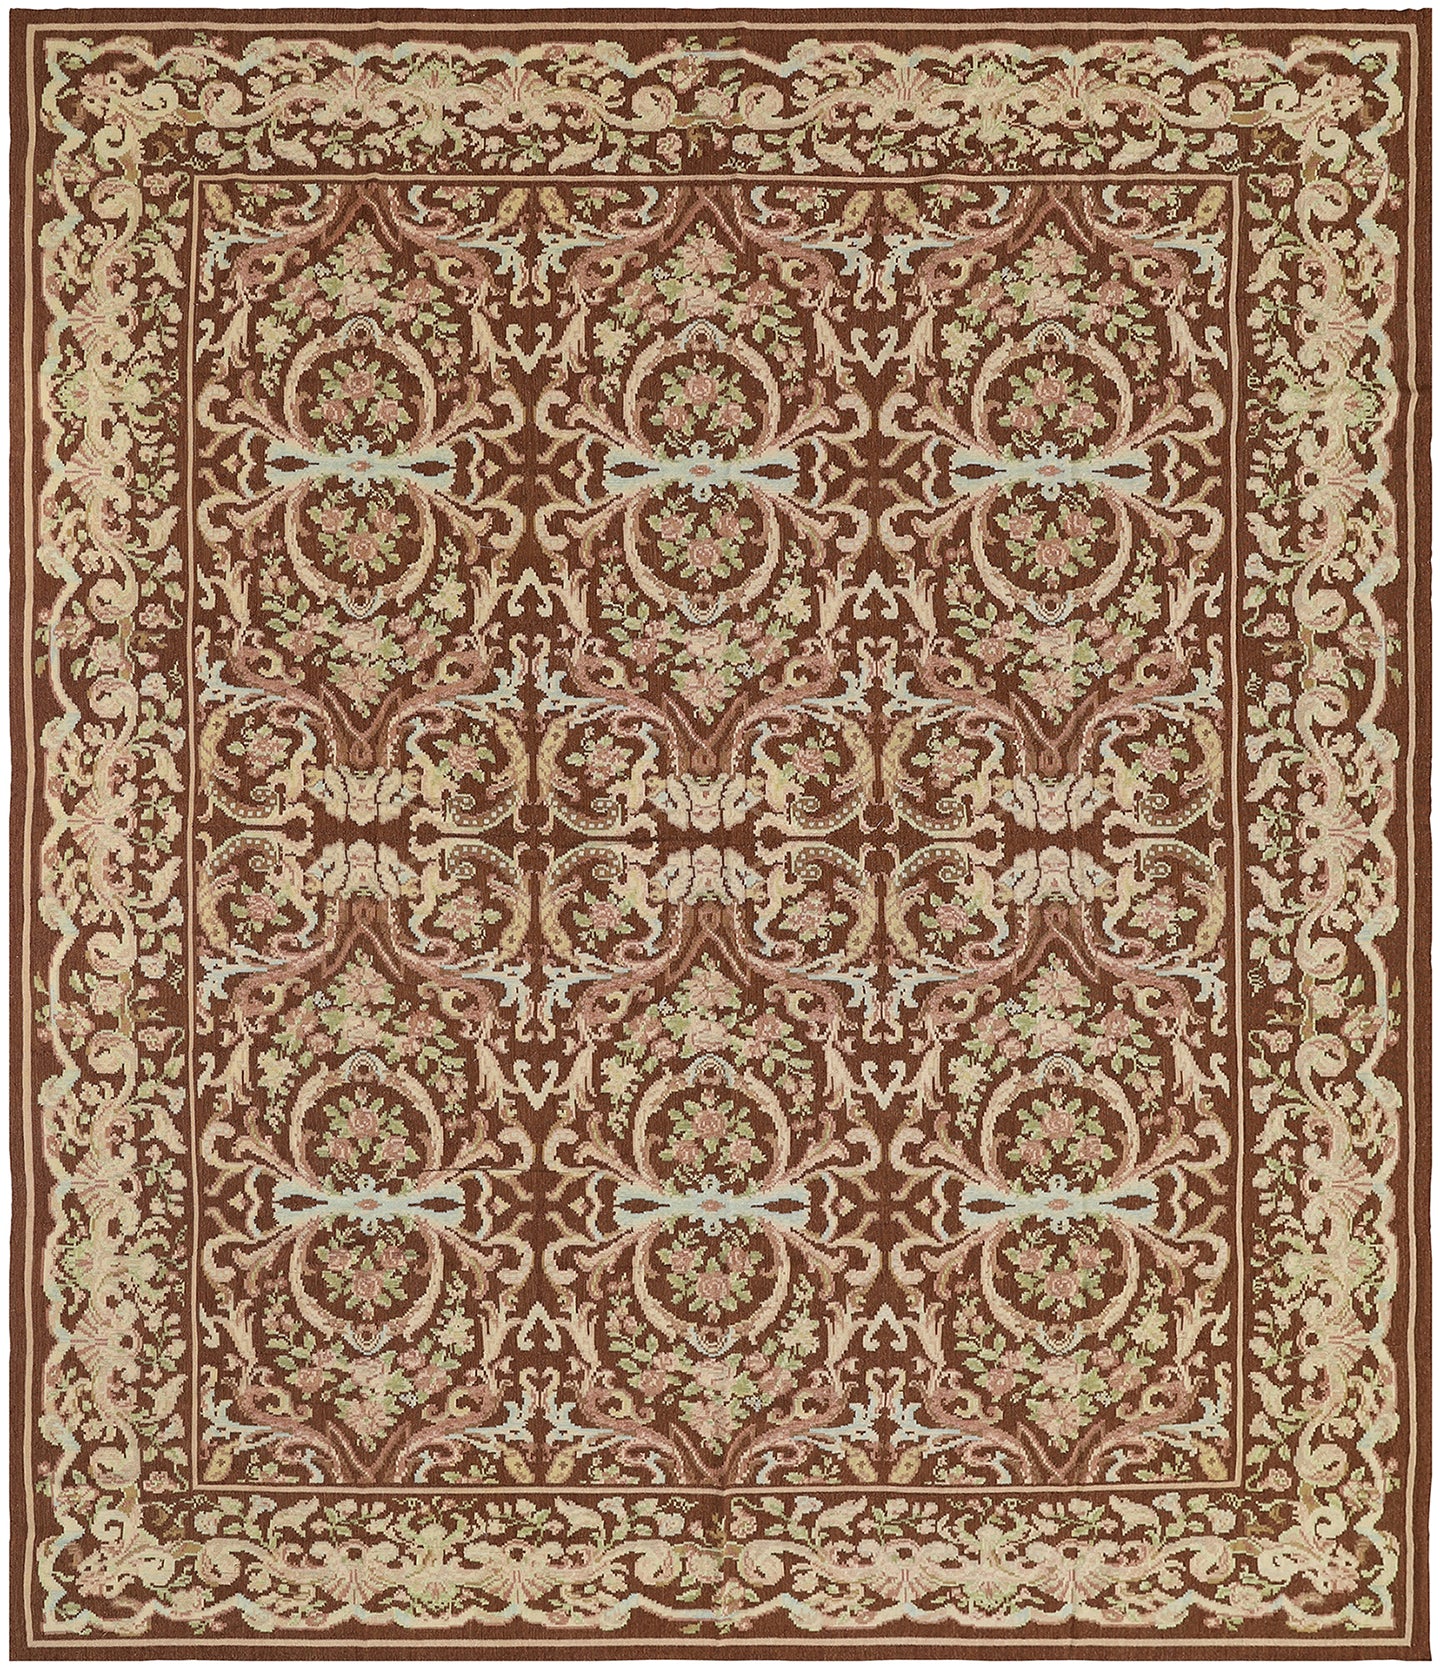 12'x15' Brown Blue Multi Colors Bessarabian Design Ariana Kilim Collection Large Rug